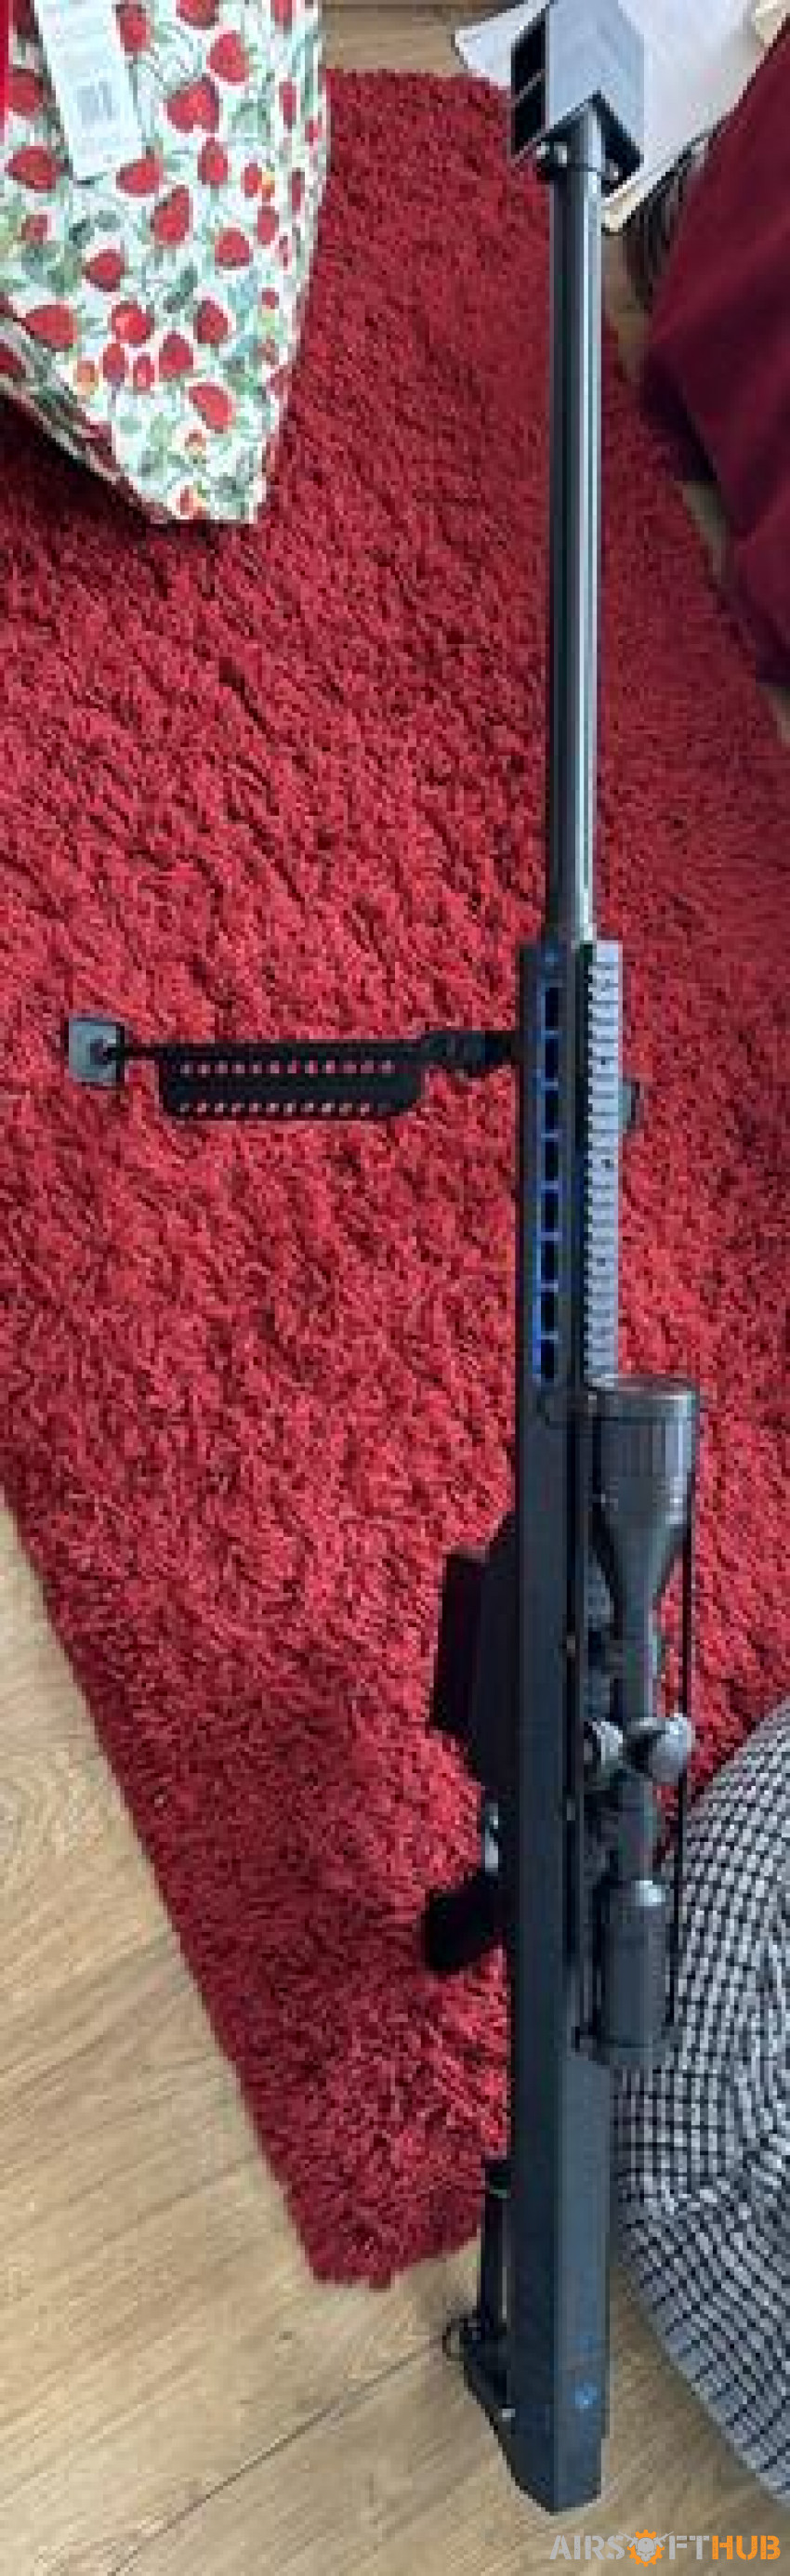 Galaxy M82 - Used airsoft equipment